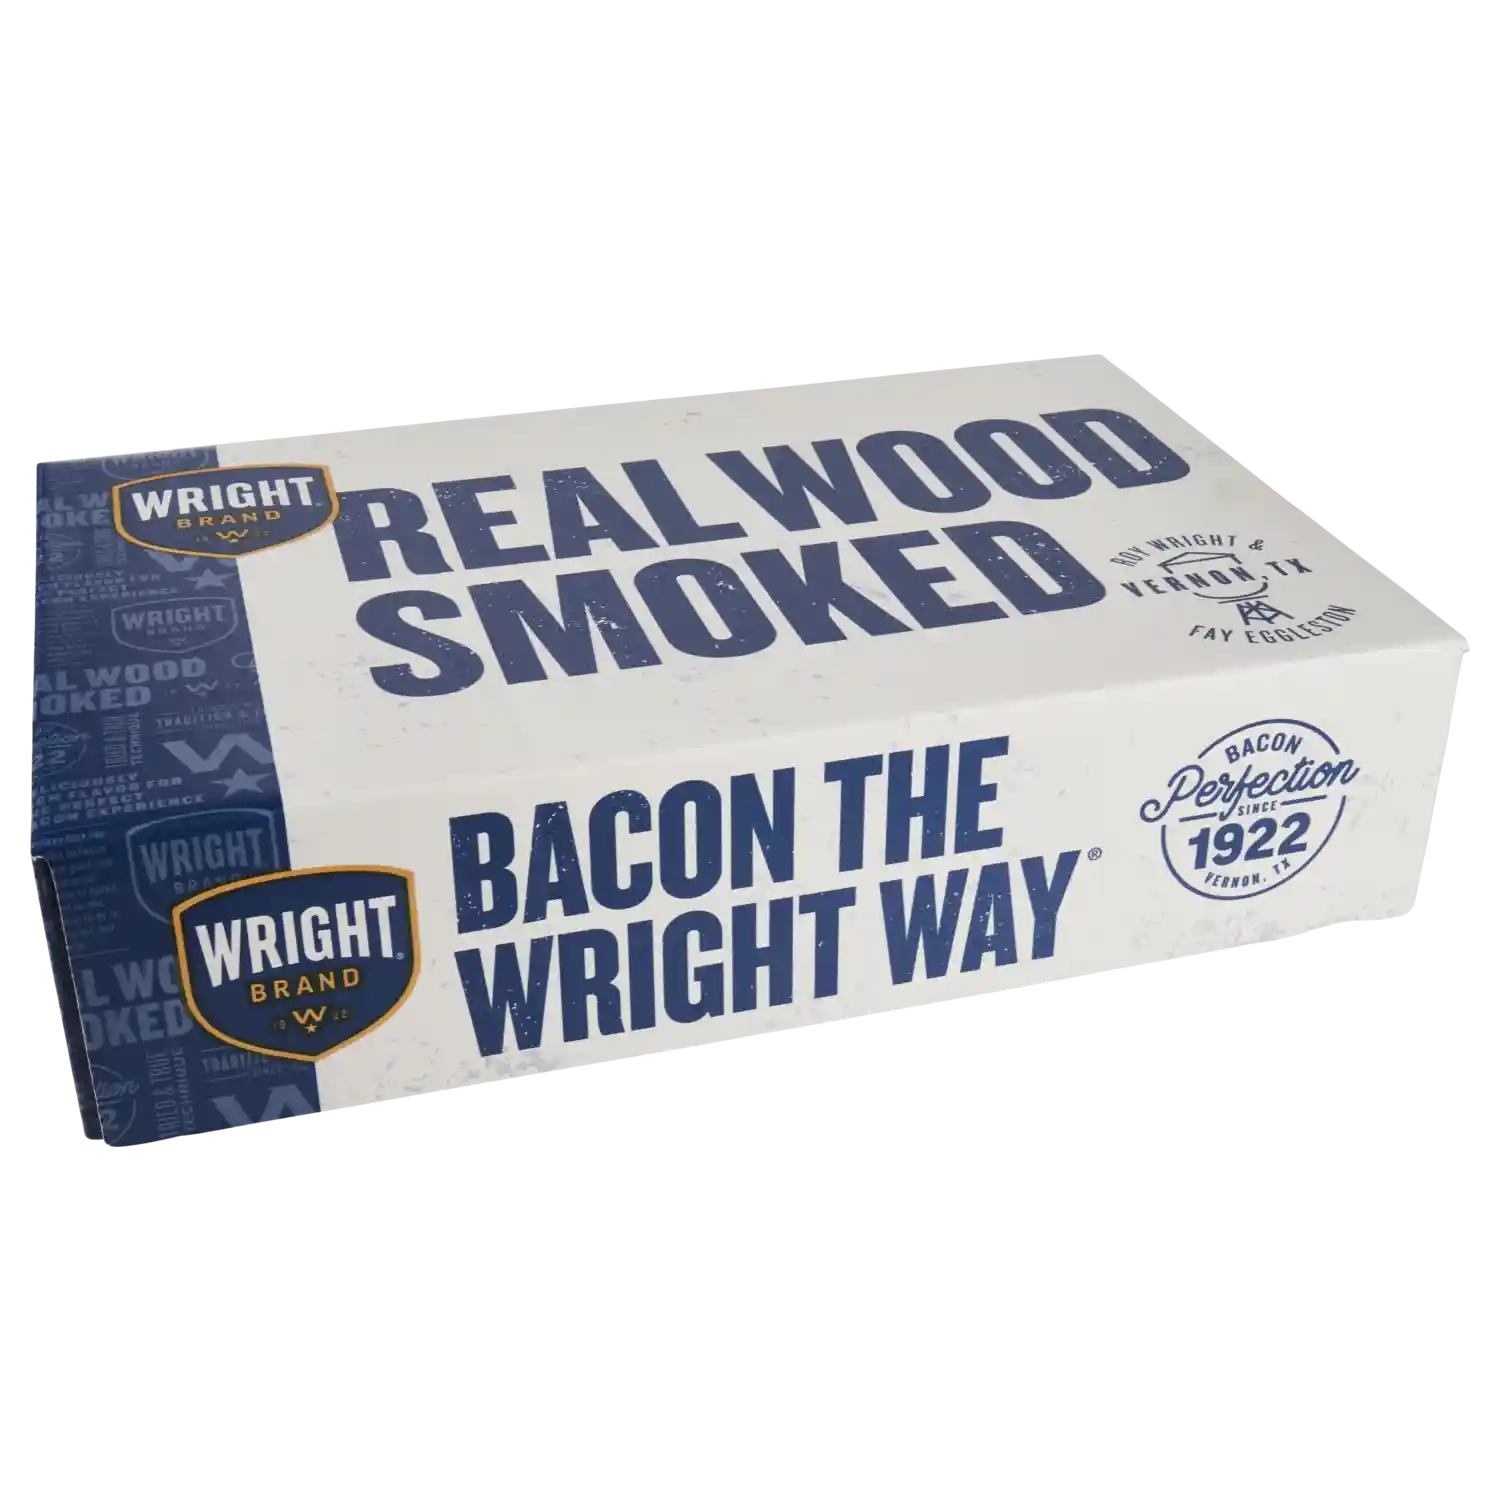 Wright® Brand Naturally Hickory Smoked Bacon, Flat-Pack®, 15 Lbs, 18-22 Slices per Pound, Frozen_image_41